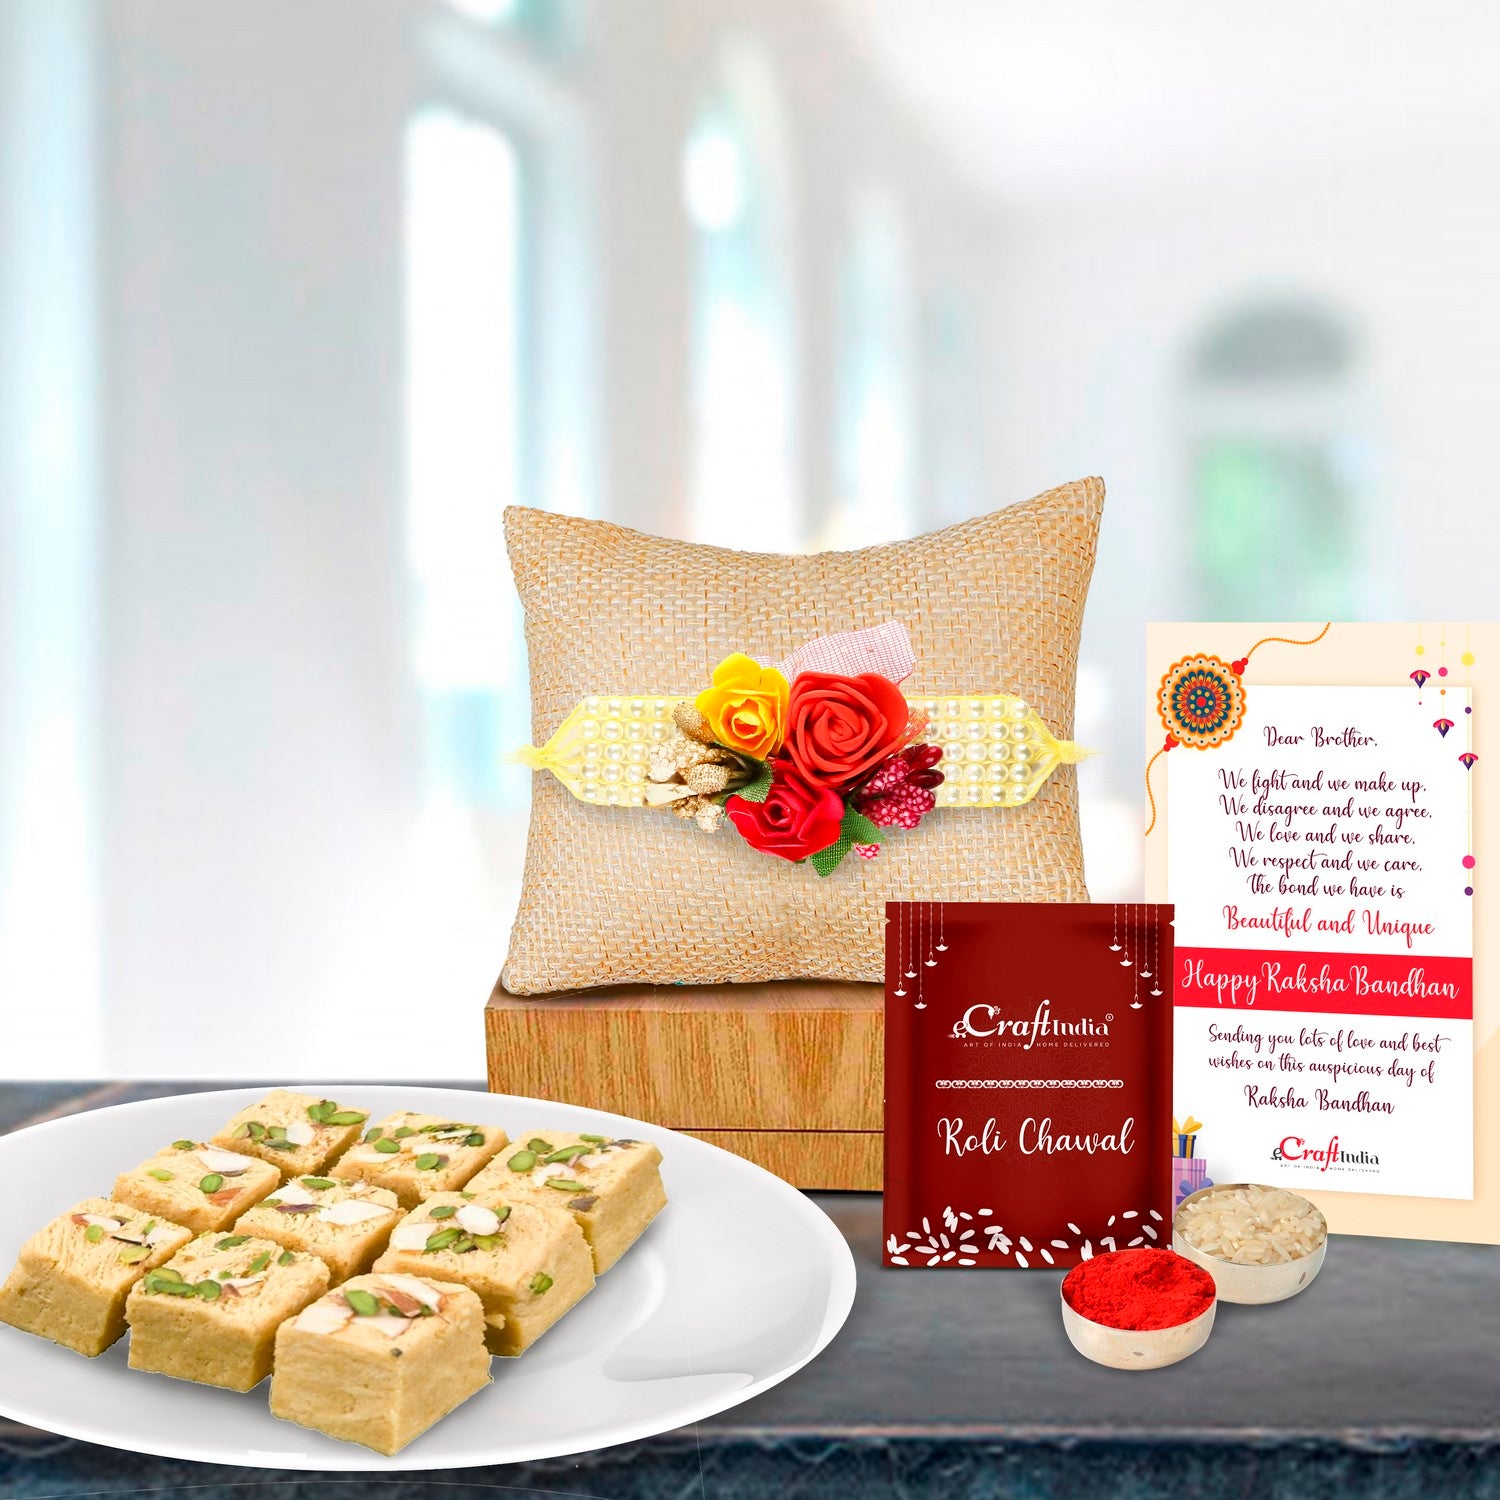 Designer Floral Rakhi with Soan Papdi (500 Gm) and Roli Chawal Pack, Best Wishes Greeting Card